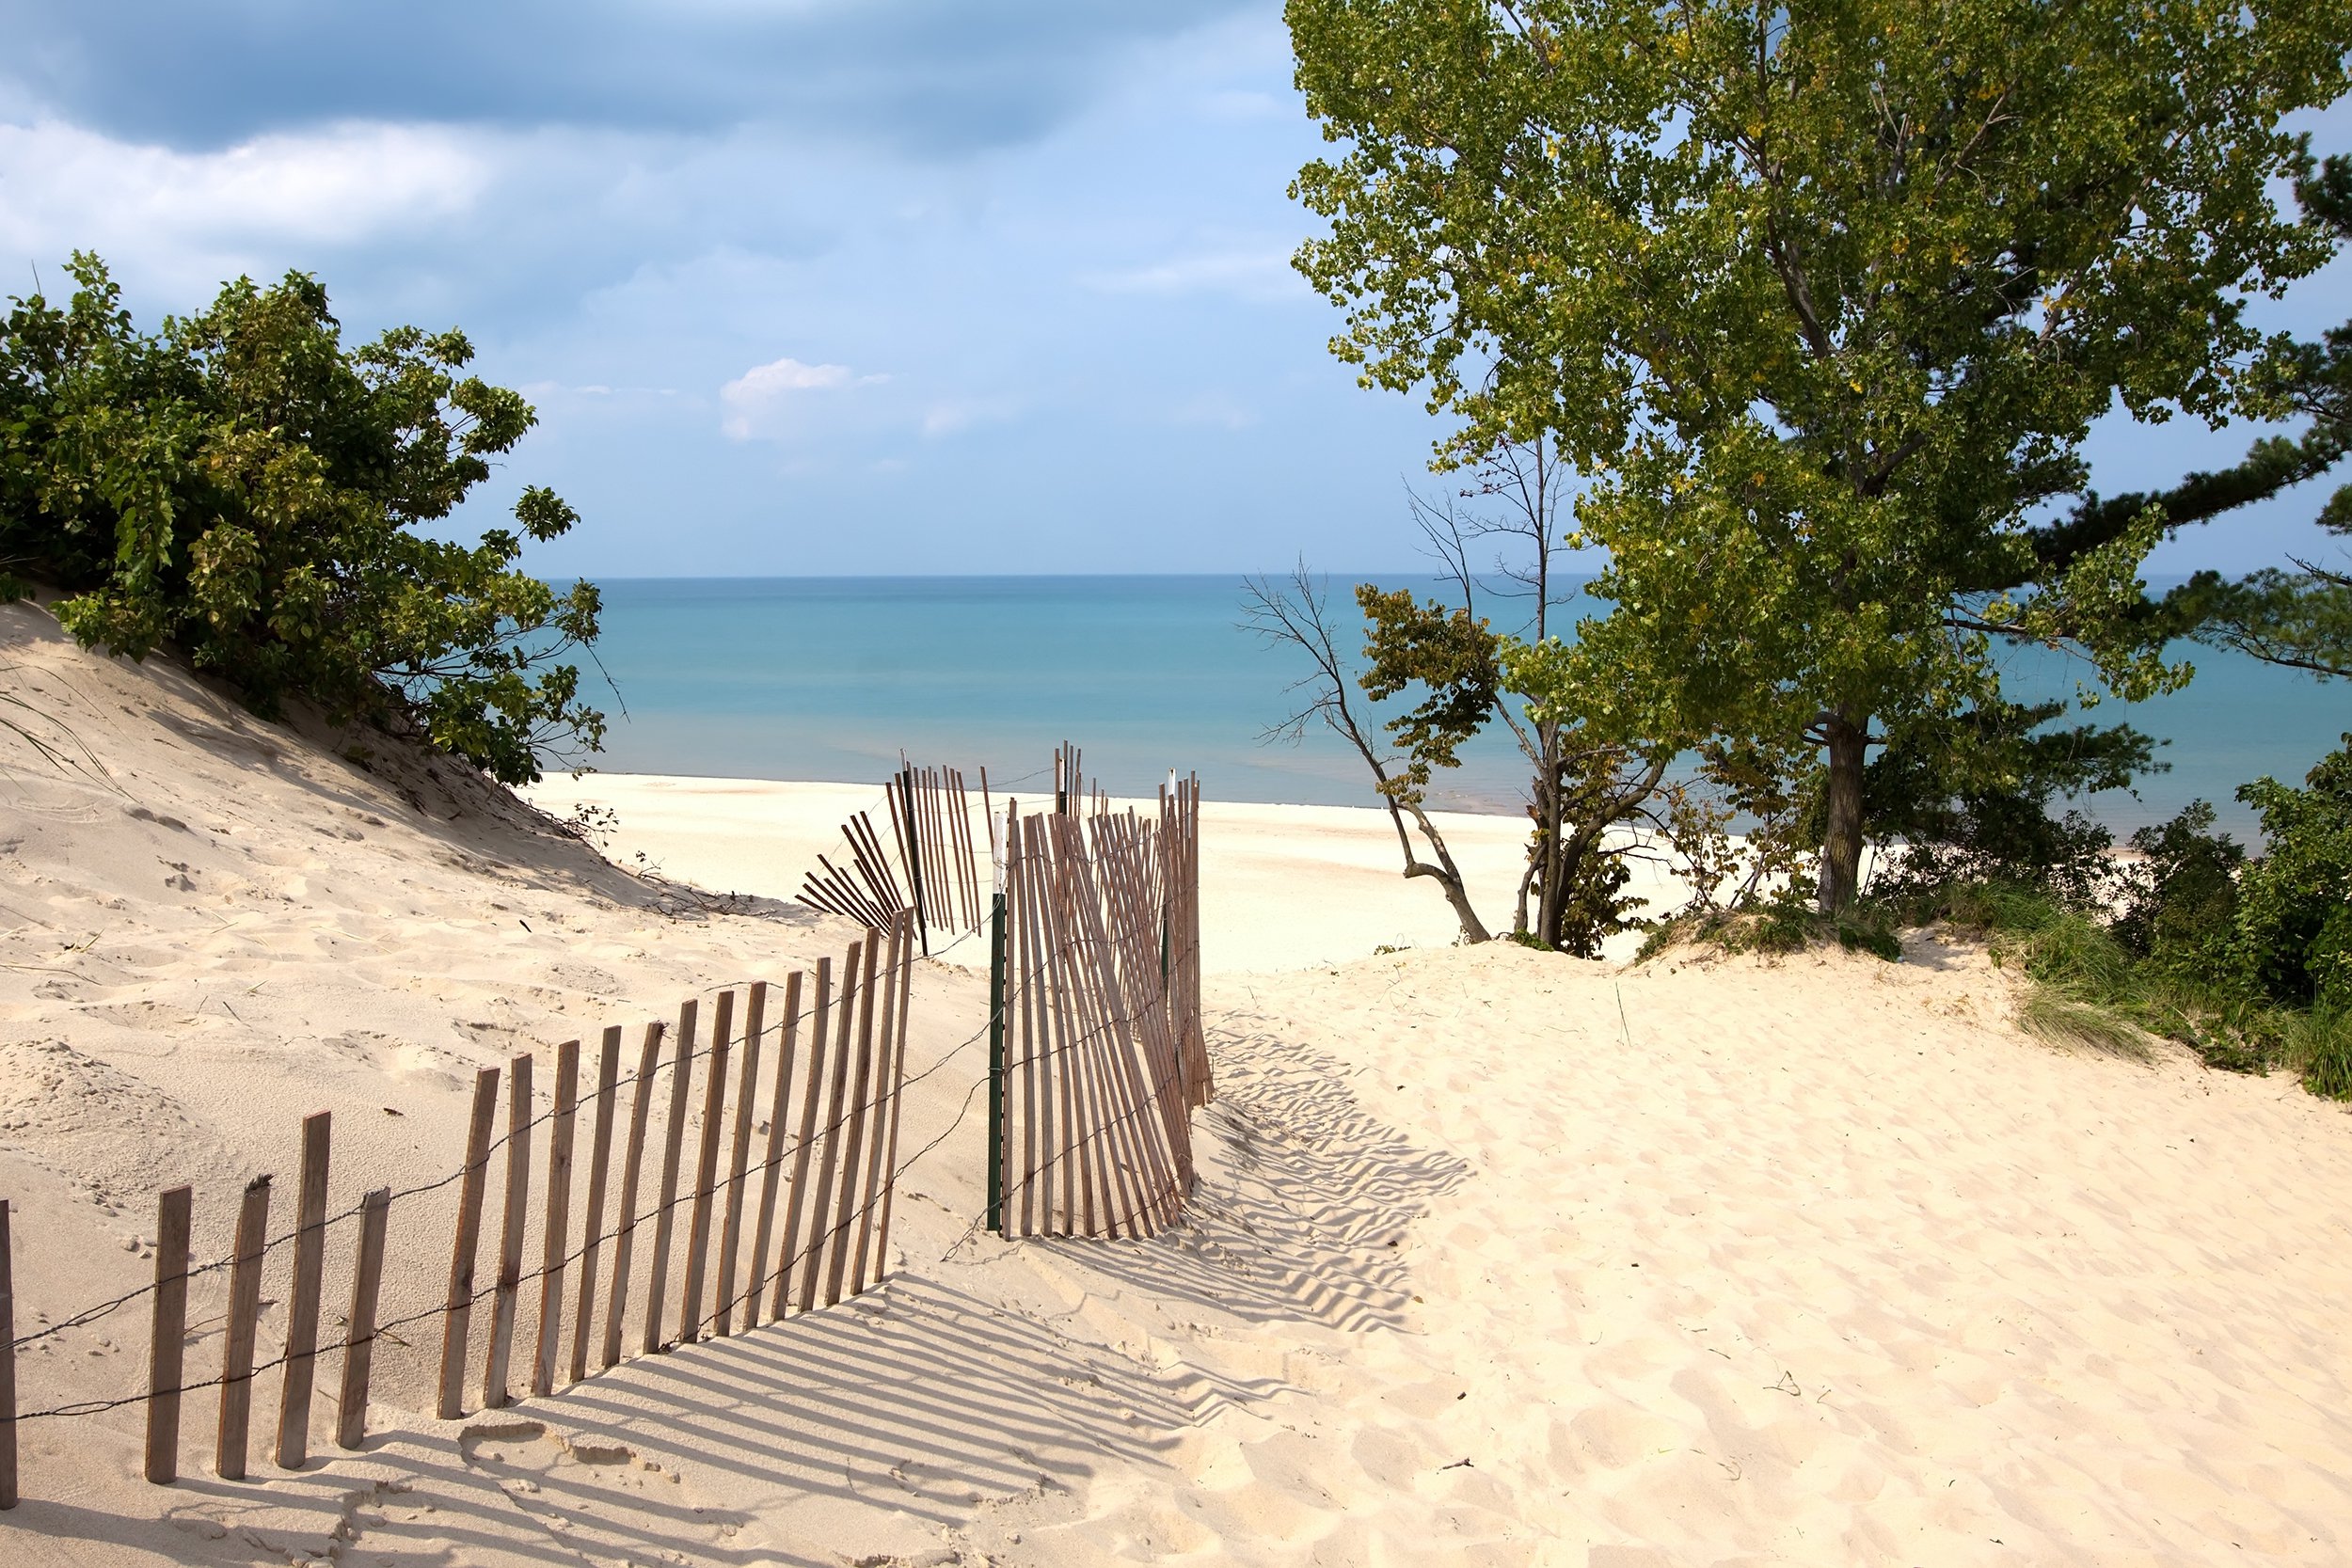 <p>Nature lovers will appreciate Indiana Dunes National Park on the southern shore of Lake Michigan. The beautiful dunes sit near one of the state's industrial hubs, offering a stark contrast to the urban development just beyond the park's borders. Head to the lakefront at dawn, when the sun is coming up over the water, for a stunning selfie. </p>